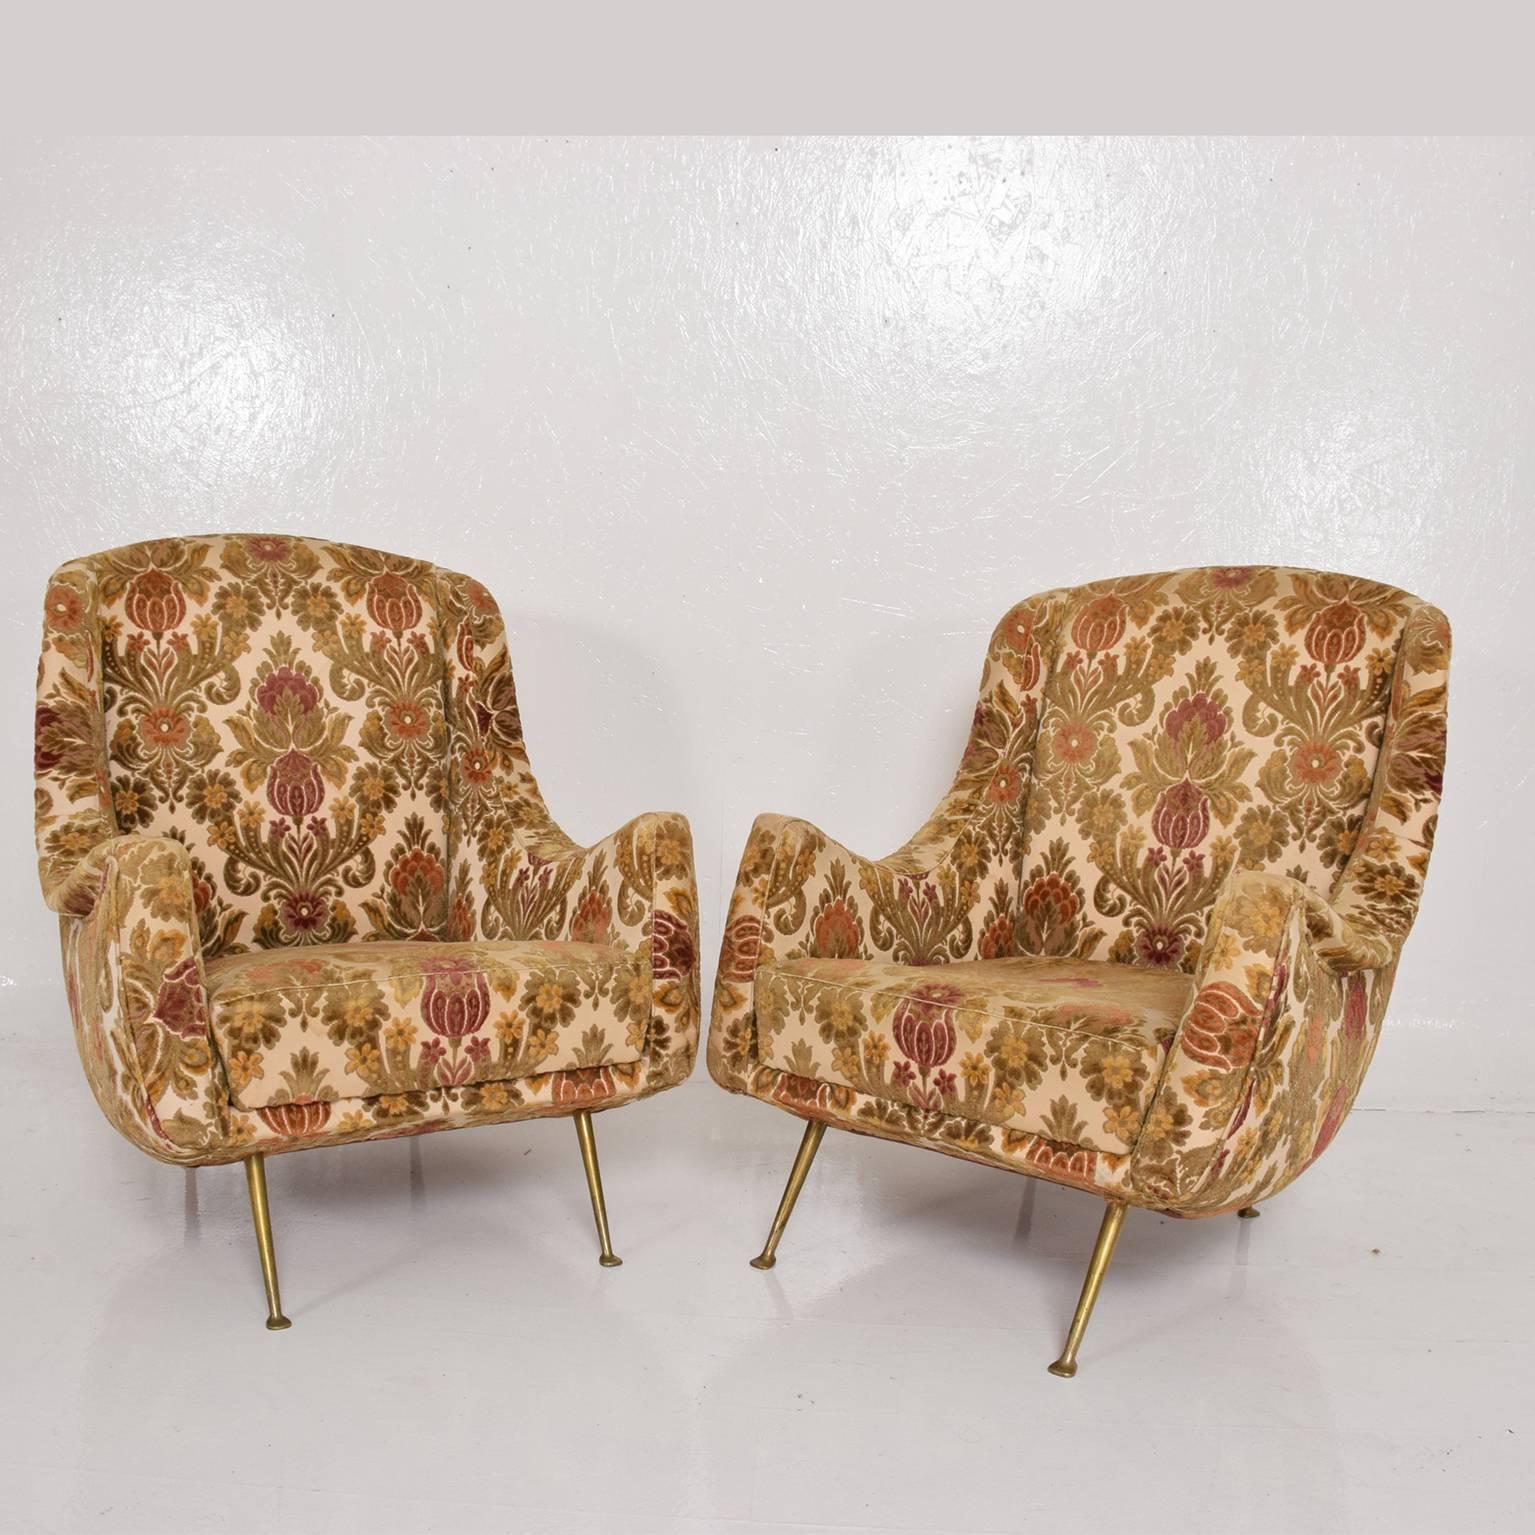 We are please to offer for your consideration a pair of sculptural armchairs. 
Original upholstery (has soem wear in the front corners of the arms). Sculptural brass legs. 

No label present form the maker. Made in Italy, circa